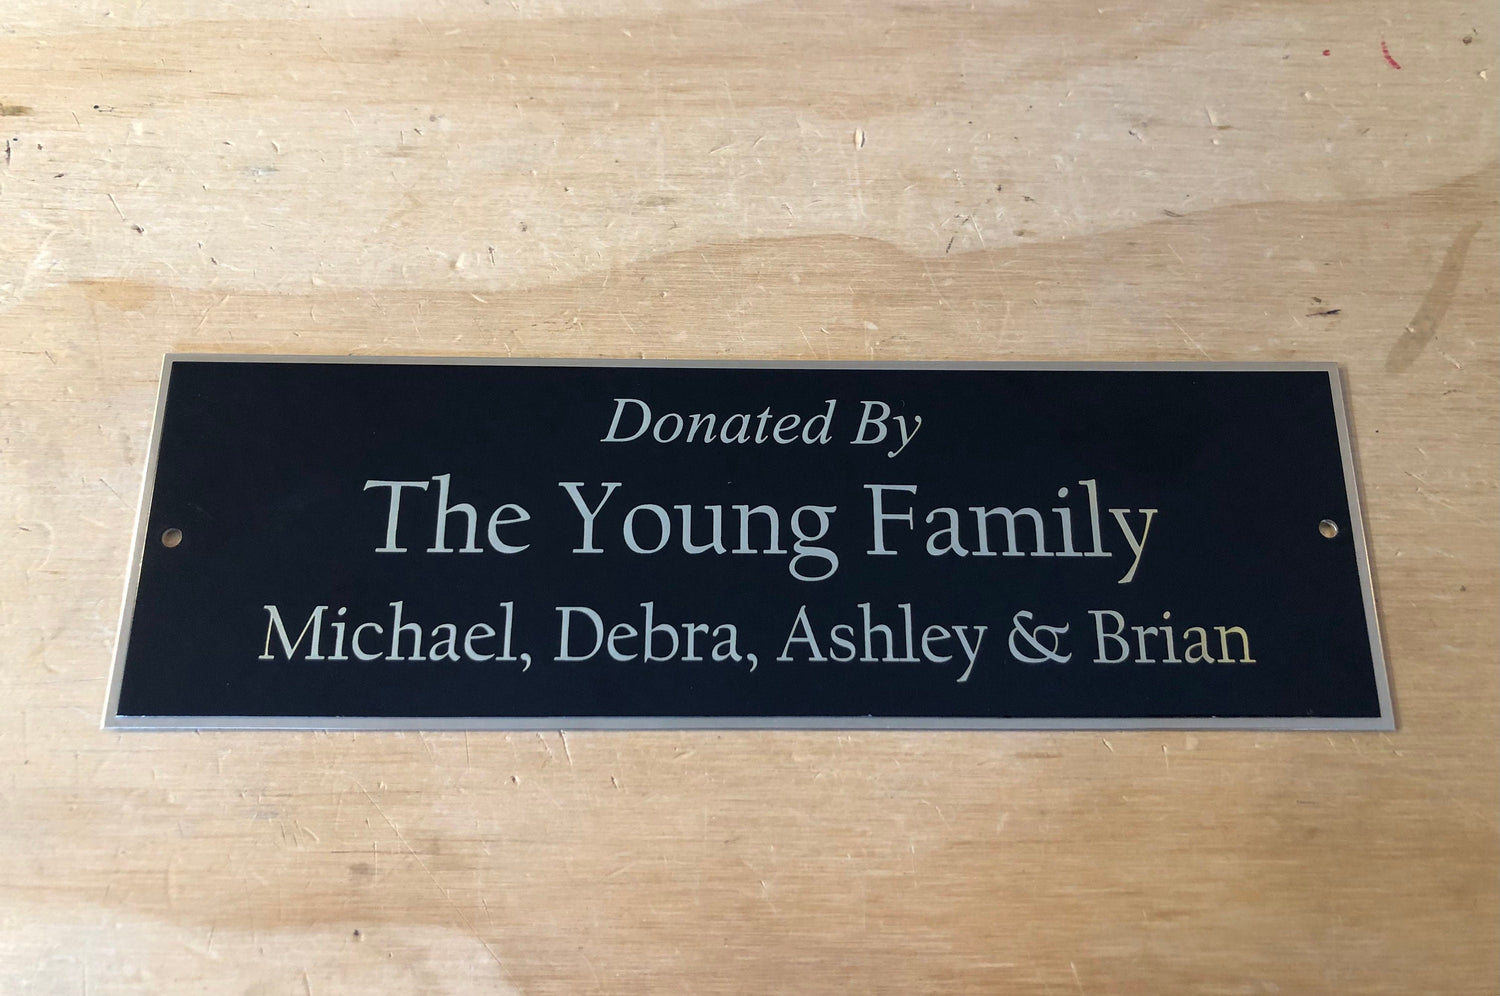 BRASS Bench Plate Custom Engraved Outdoor Plaque Name Plate Donated By or In Memory Of Cremation Urn or Engraved Plate Name Plaque